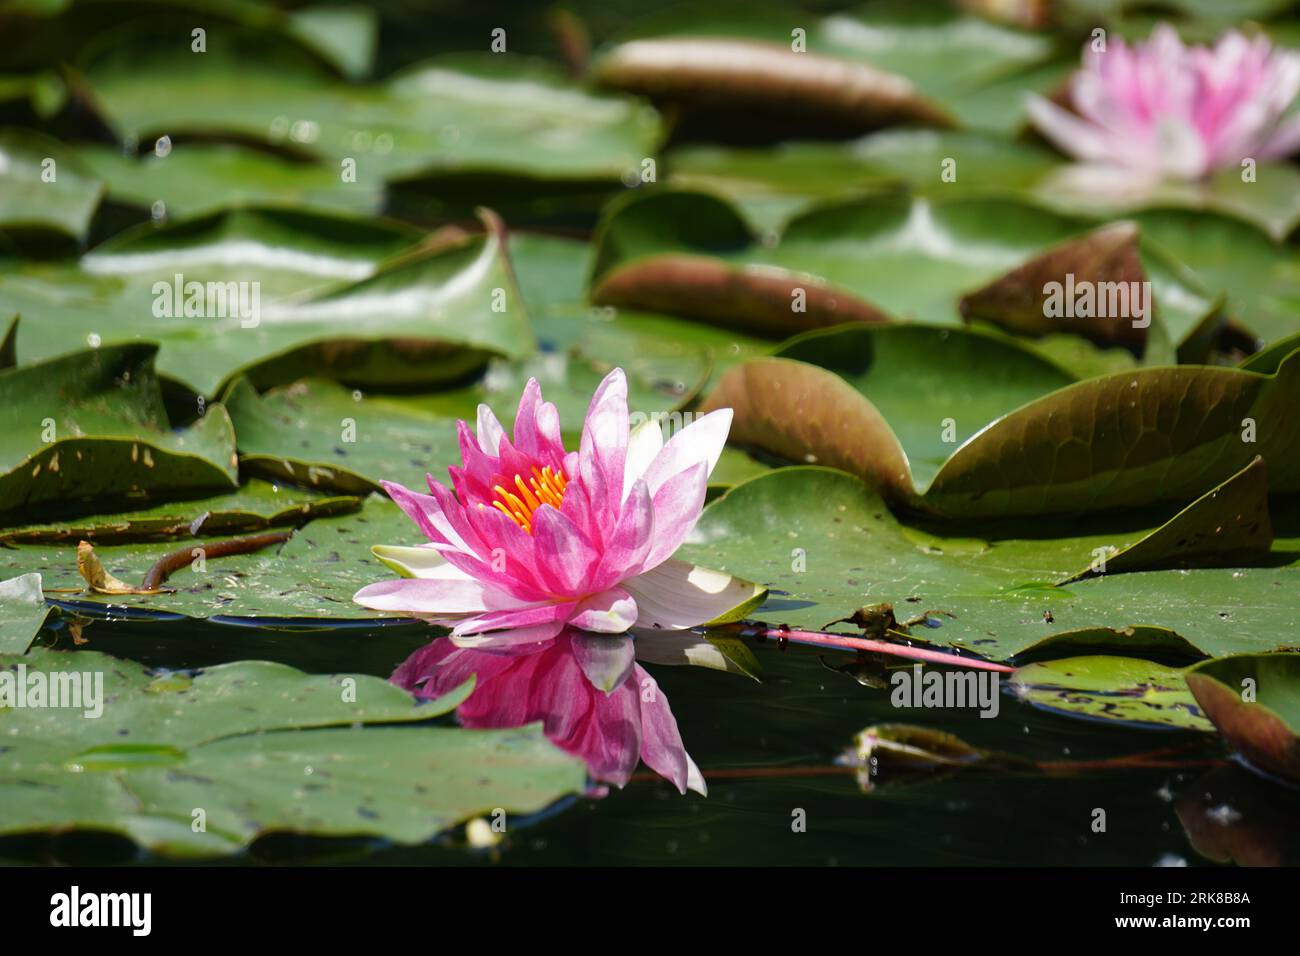 A beautiful pink water lily flower floating atop a tranquil body of water. Stock Photo